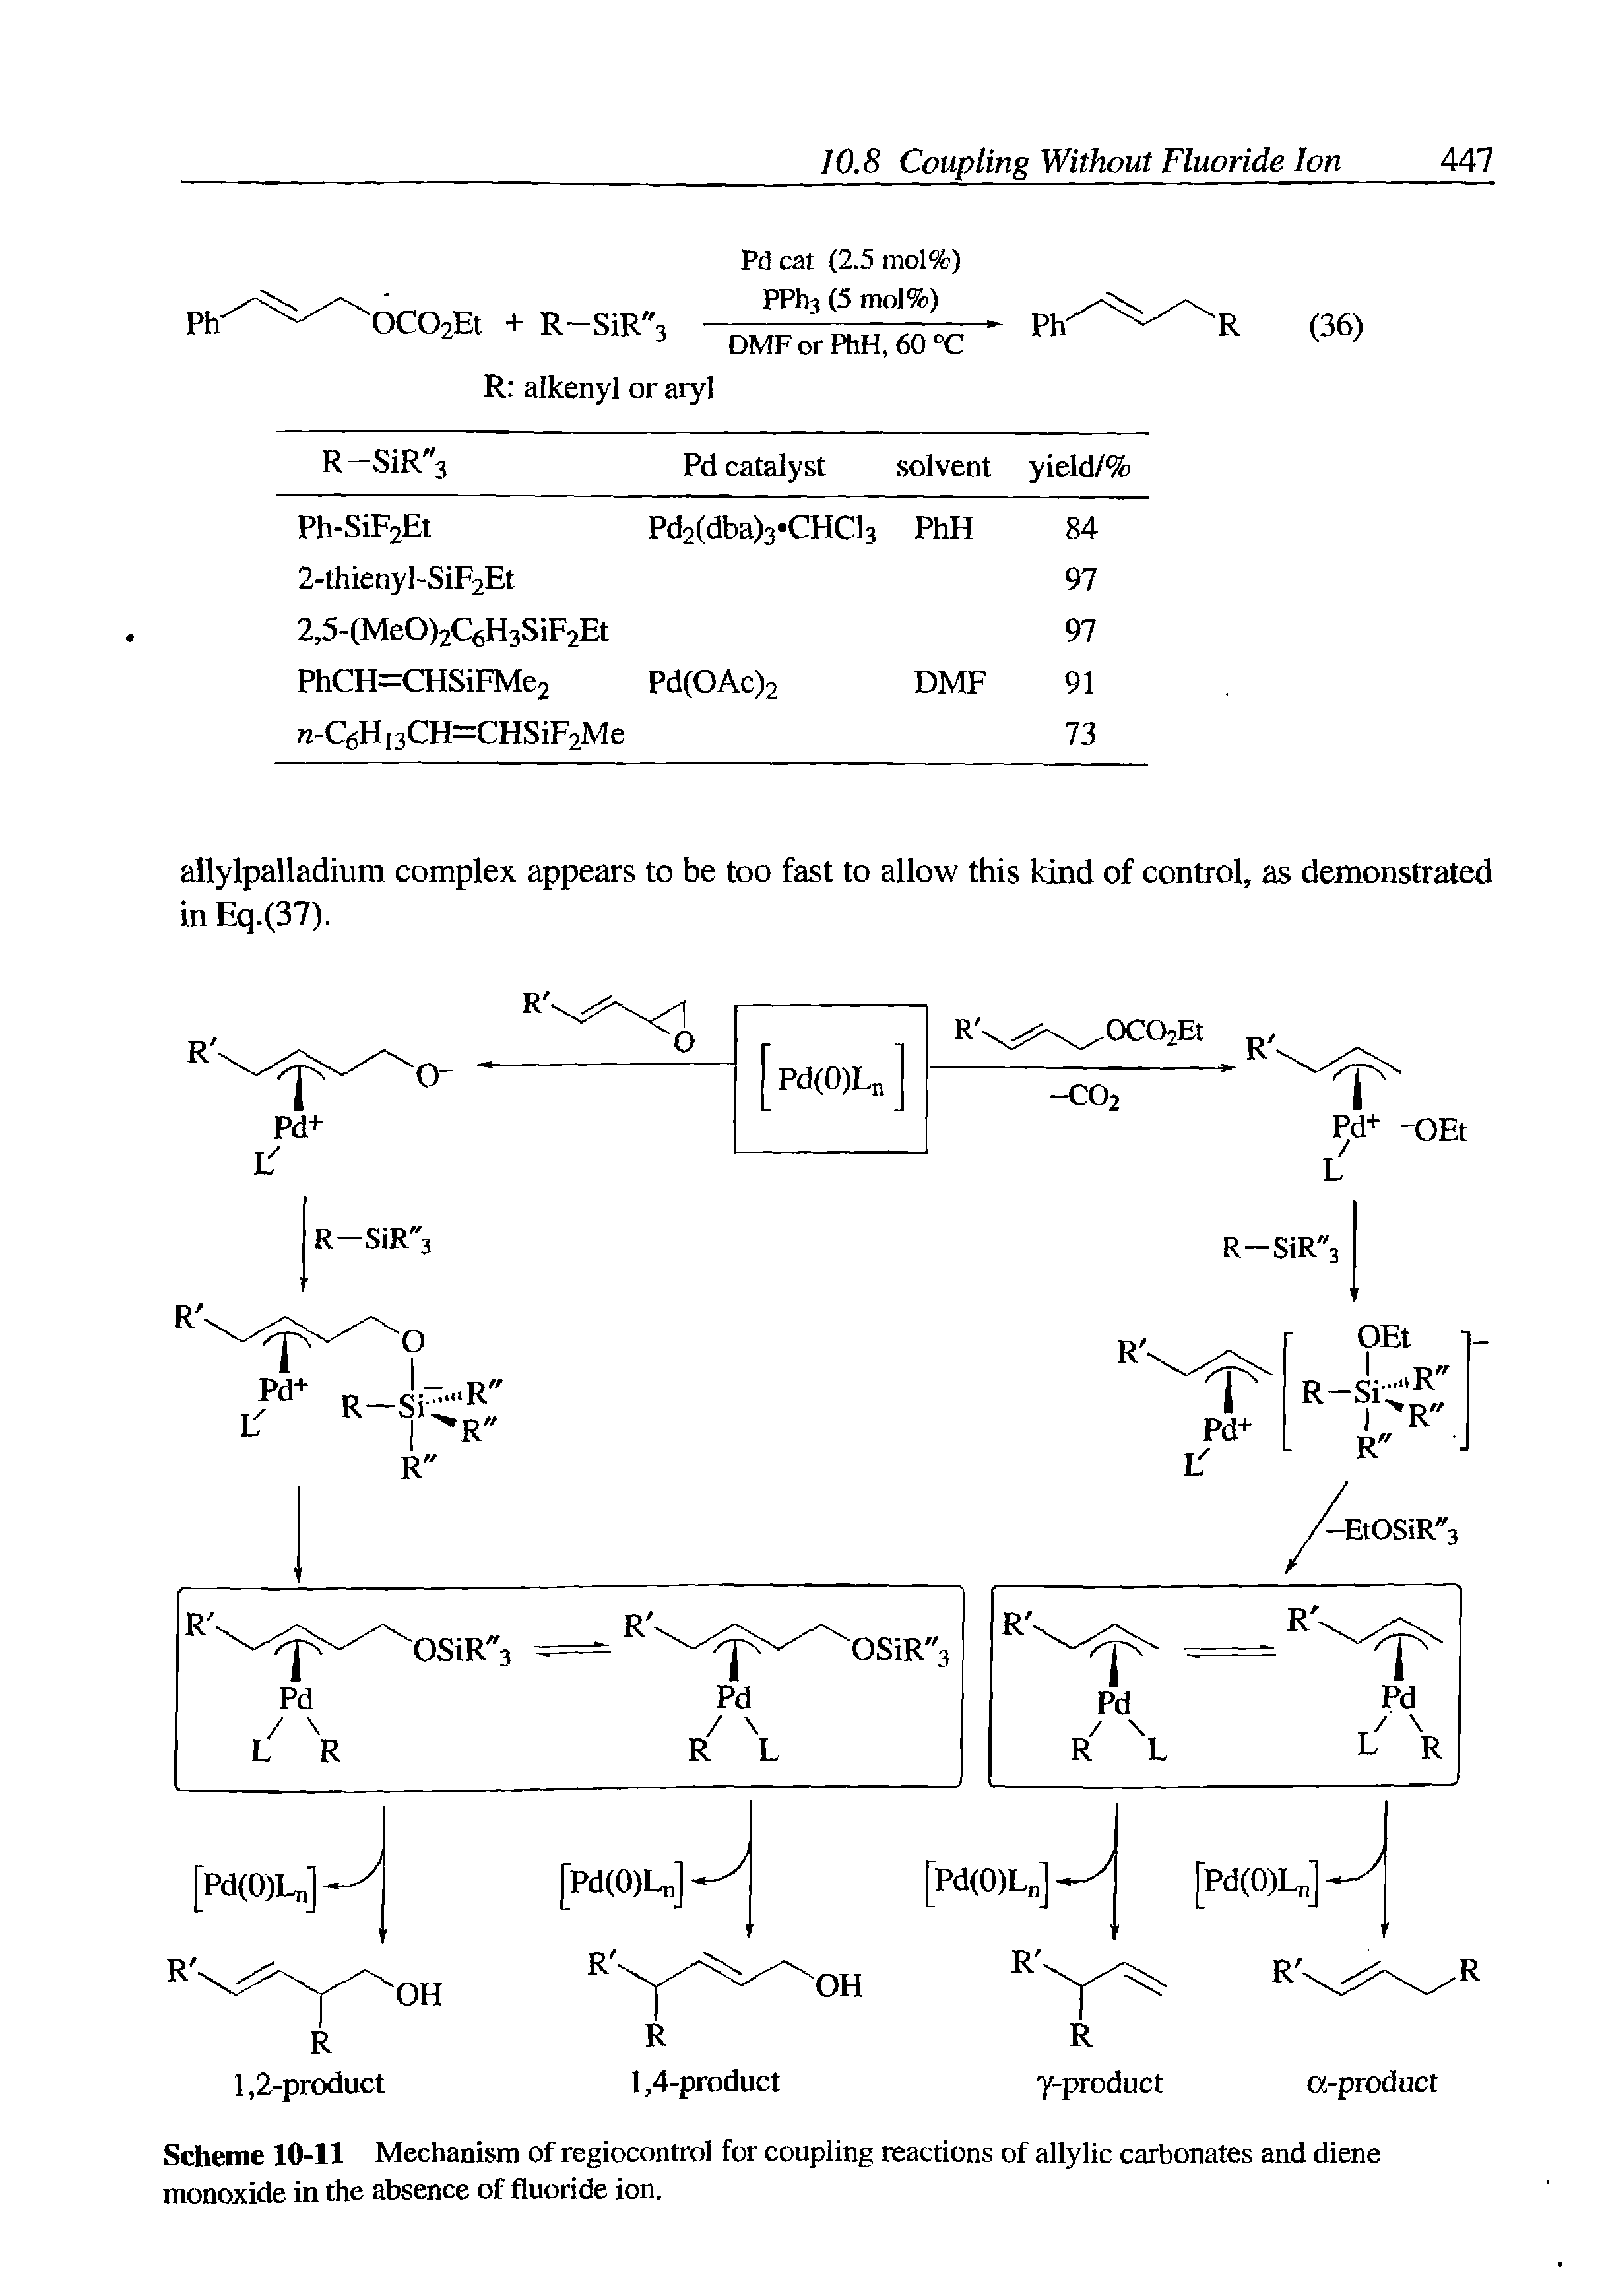 Scheme 10-11 Mechanism of regiocontrol for coupling reactions of allylic carbonates and diene monoxide in the absence of fluoride ion.